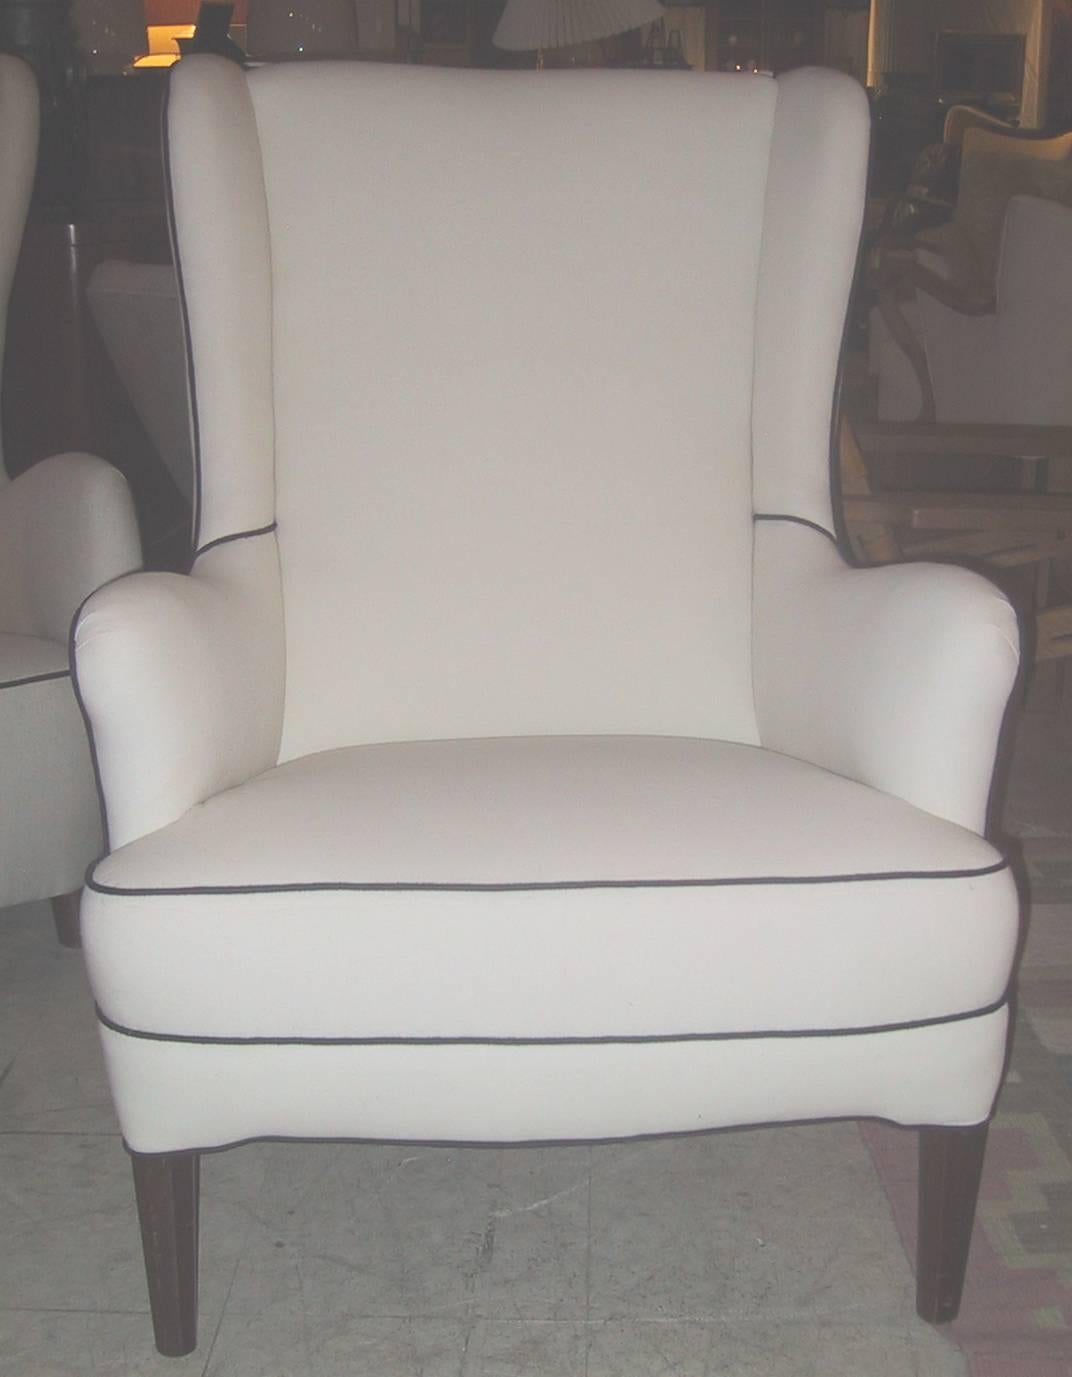 Danish 1940s upholstered large wing chair by Danish designer Frits Henningsen. The chair newly upholstered in a white linen type fabric with black piping. The legs of stained beech.